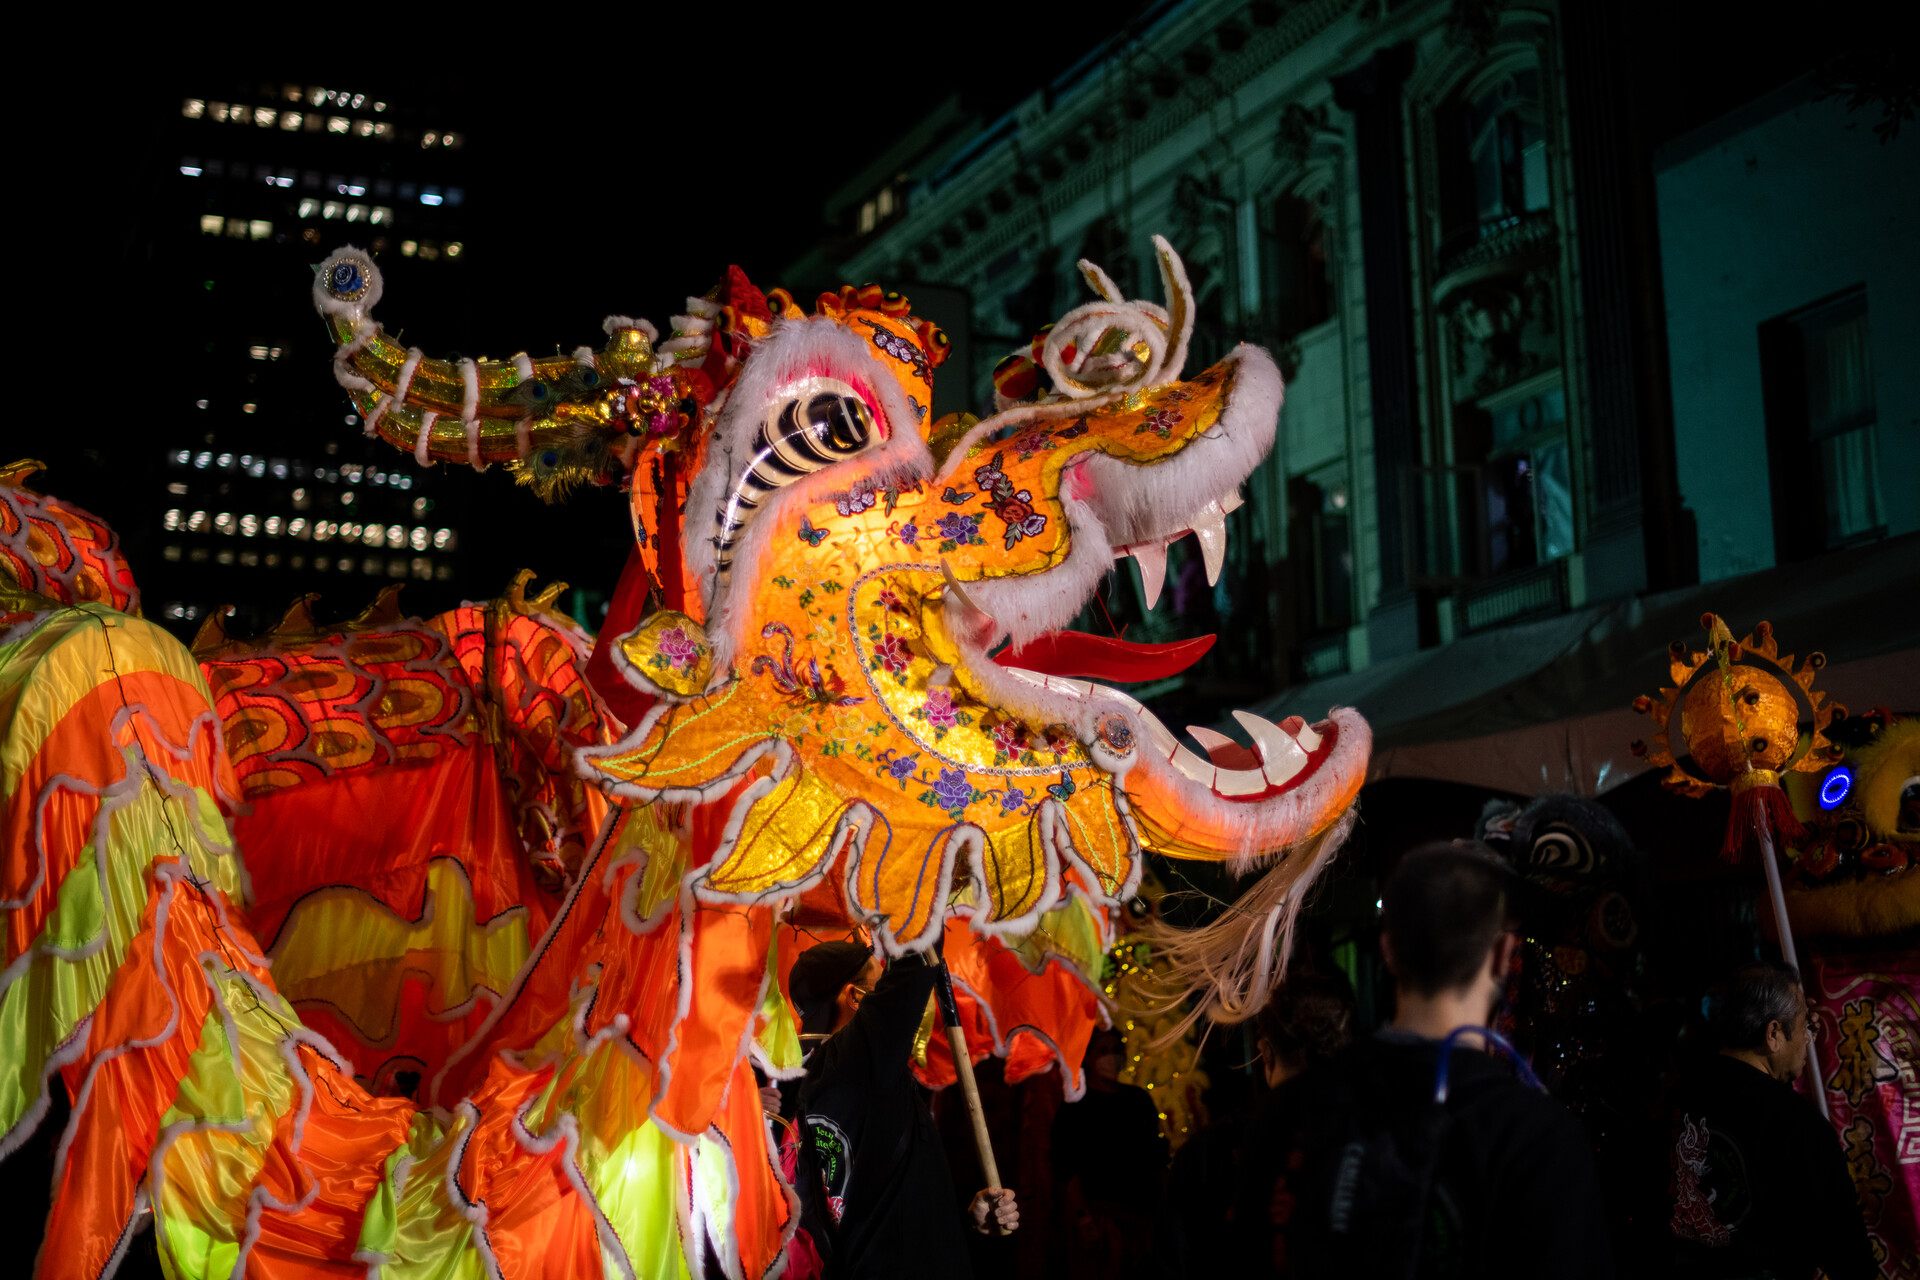 A yellow-colored dragon head glows with light against a dark background.